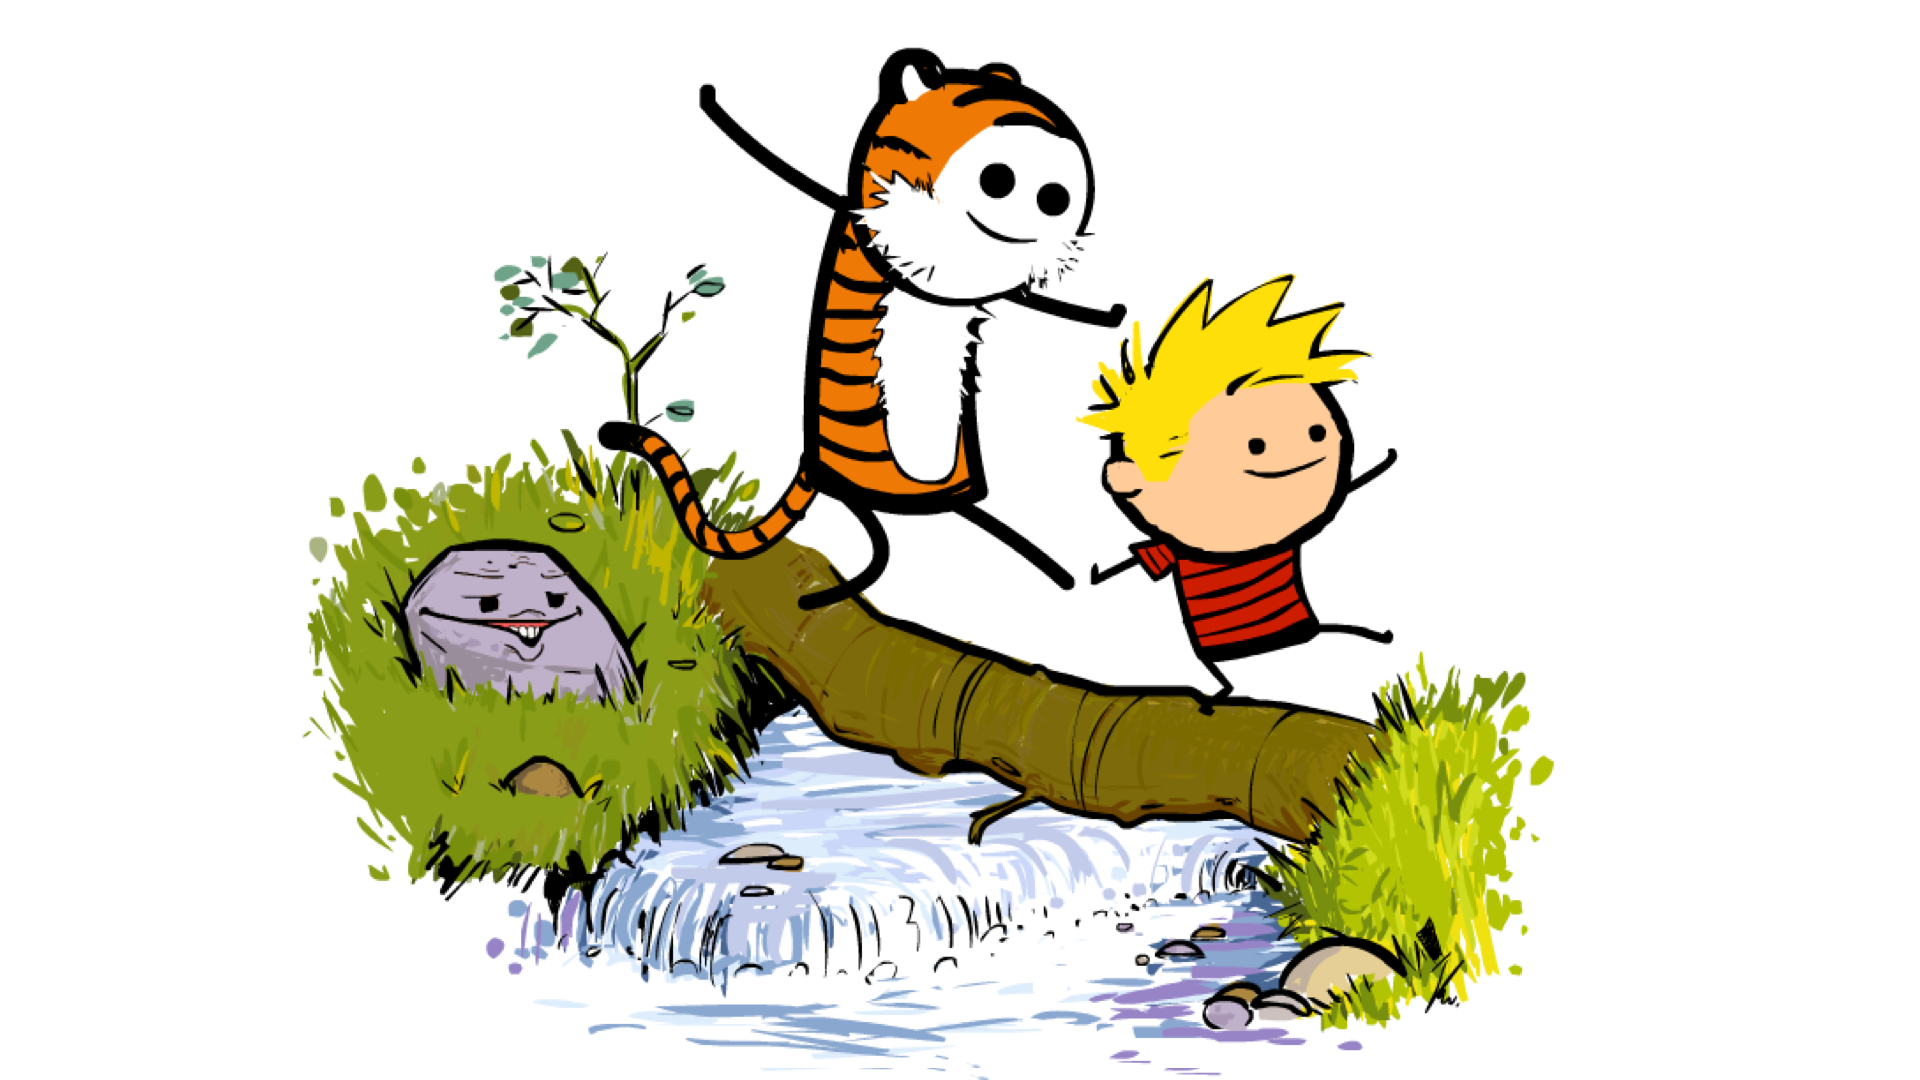 General 1920x1080 Calvin and Hobbes Cyanide and Happiness mash-ups humor crossover log cartoon artwork white background DeviantArt